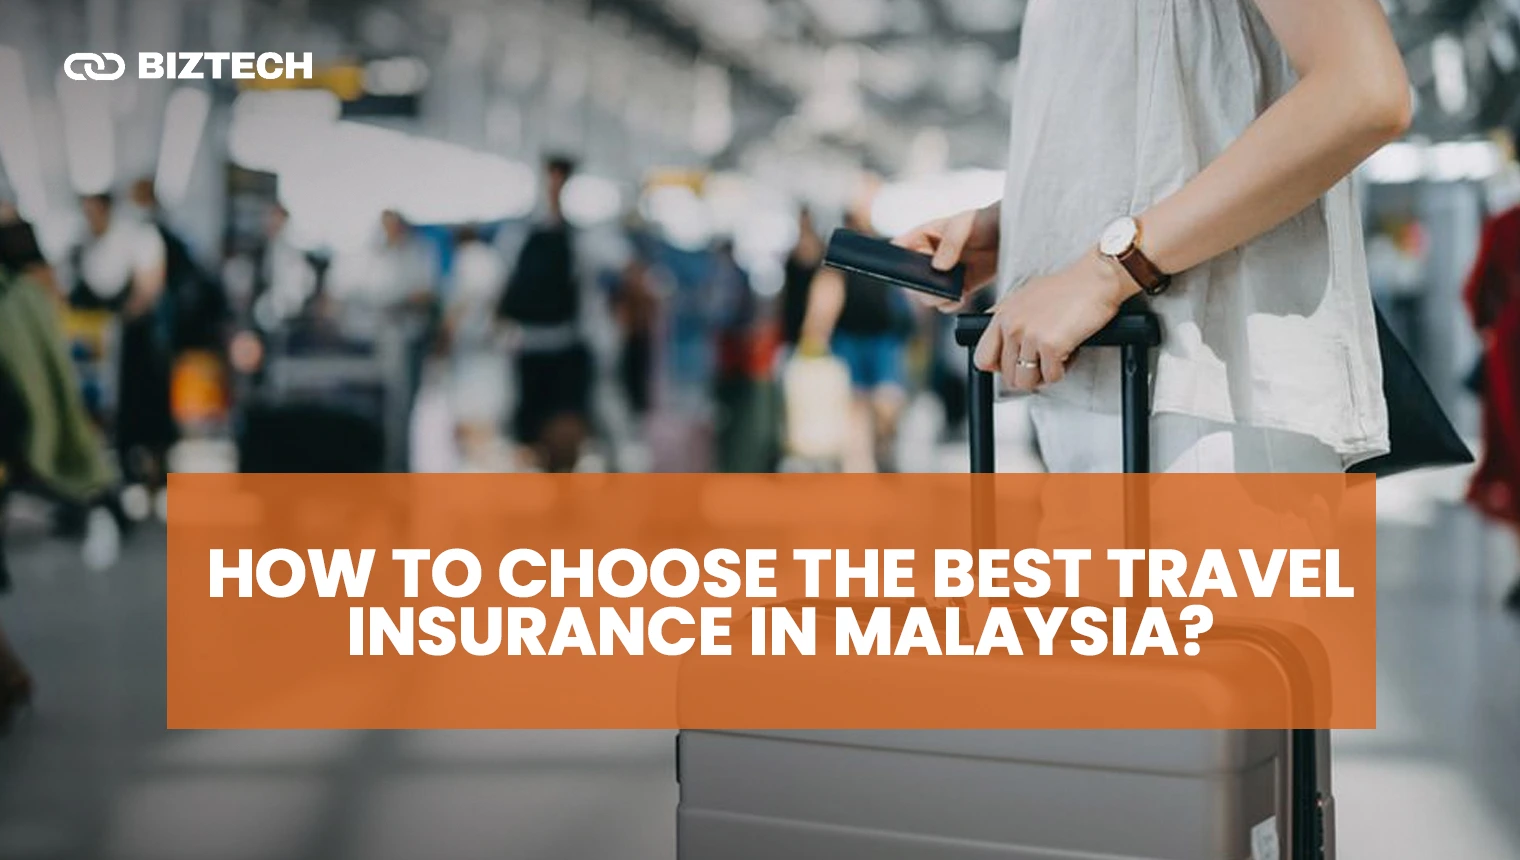 How To Choose The Best Travel Insurance in Malaysia